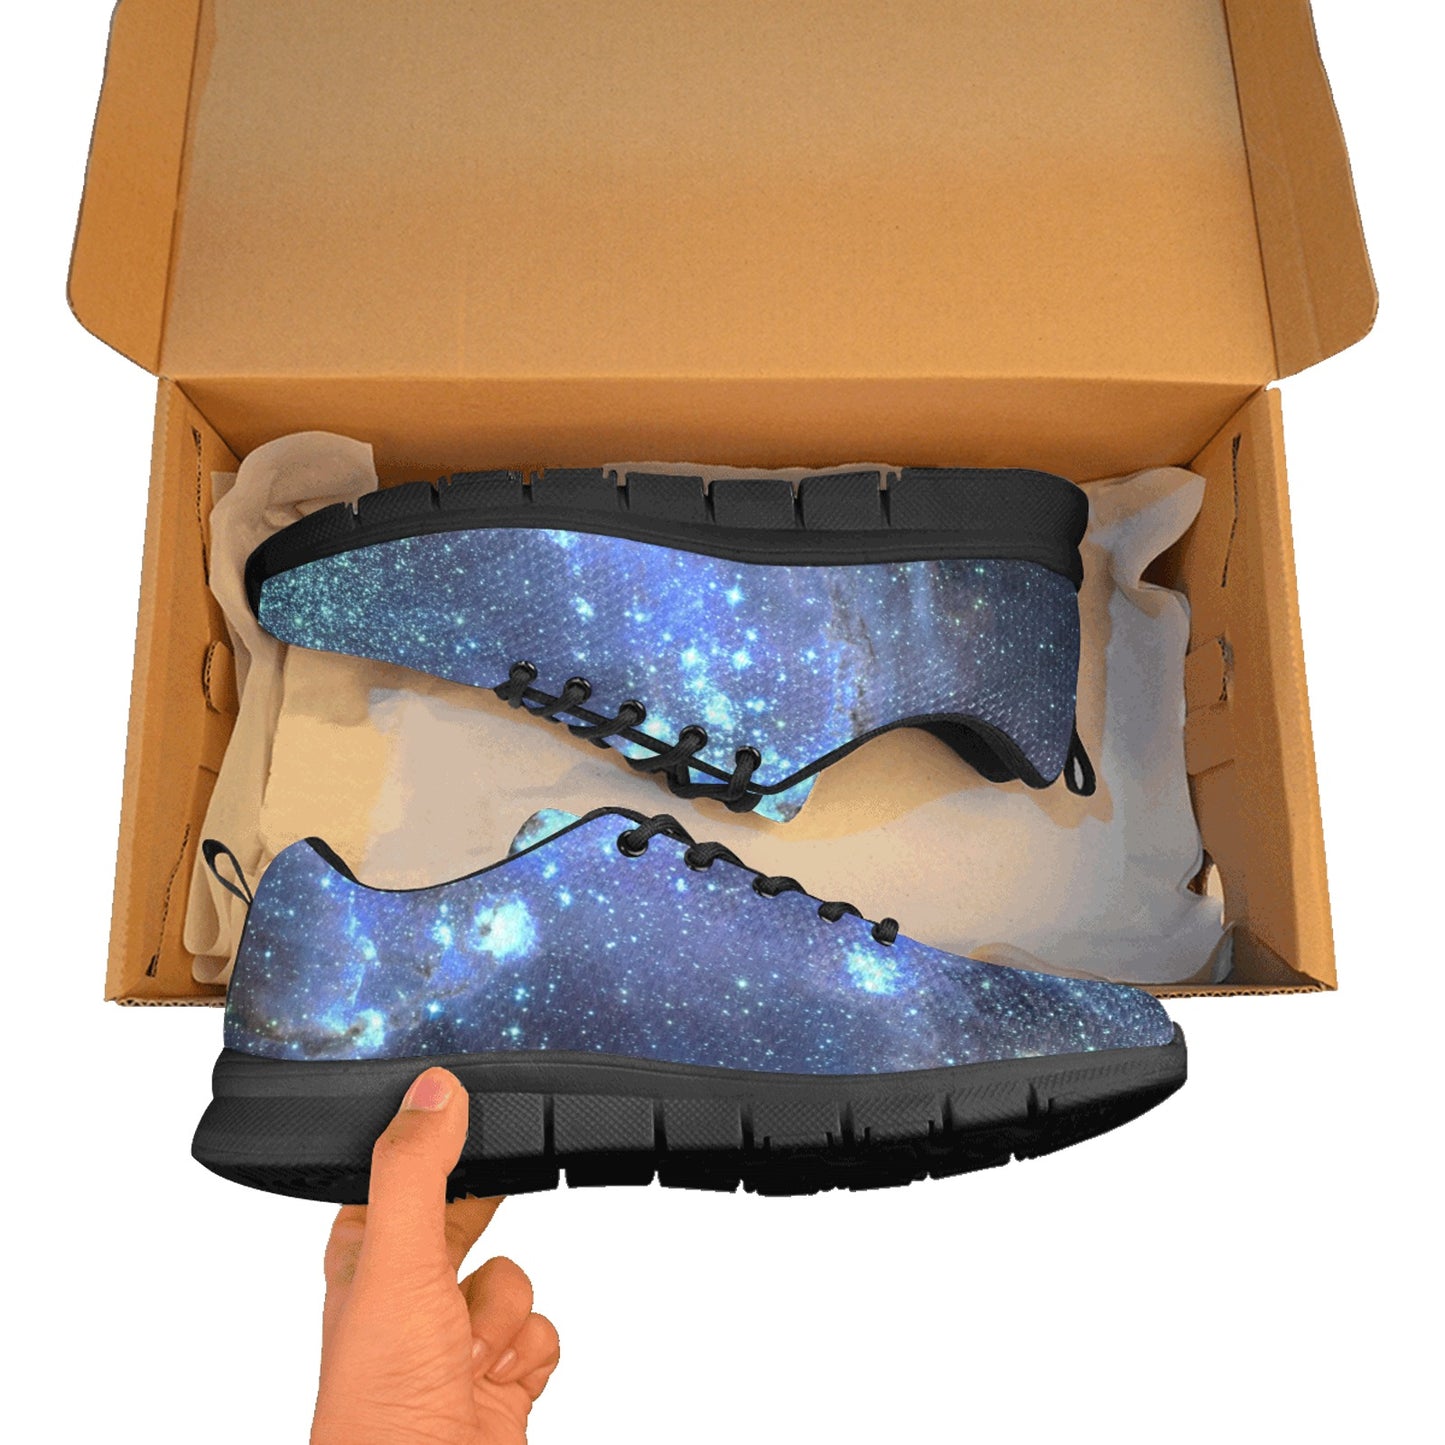 Galaxy Men Breathable Sneakers, Space Blue Stars Universe Pattern Print Lace Up Comfortable Designer Casual Mesh Dress Shoes Trainers